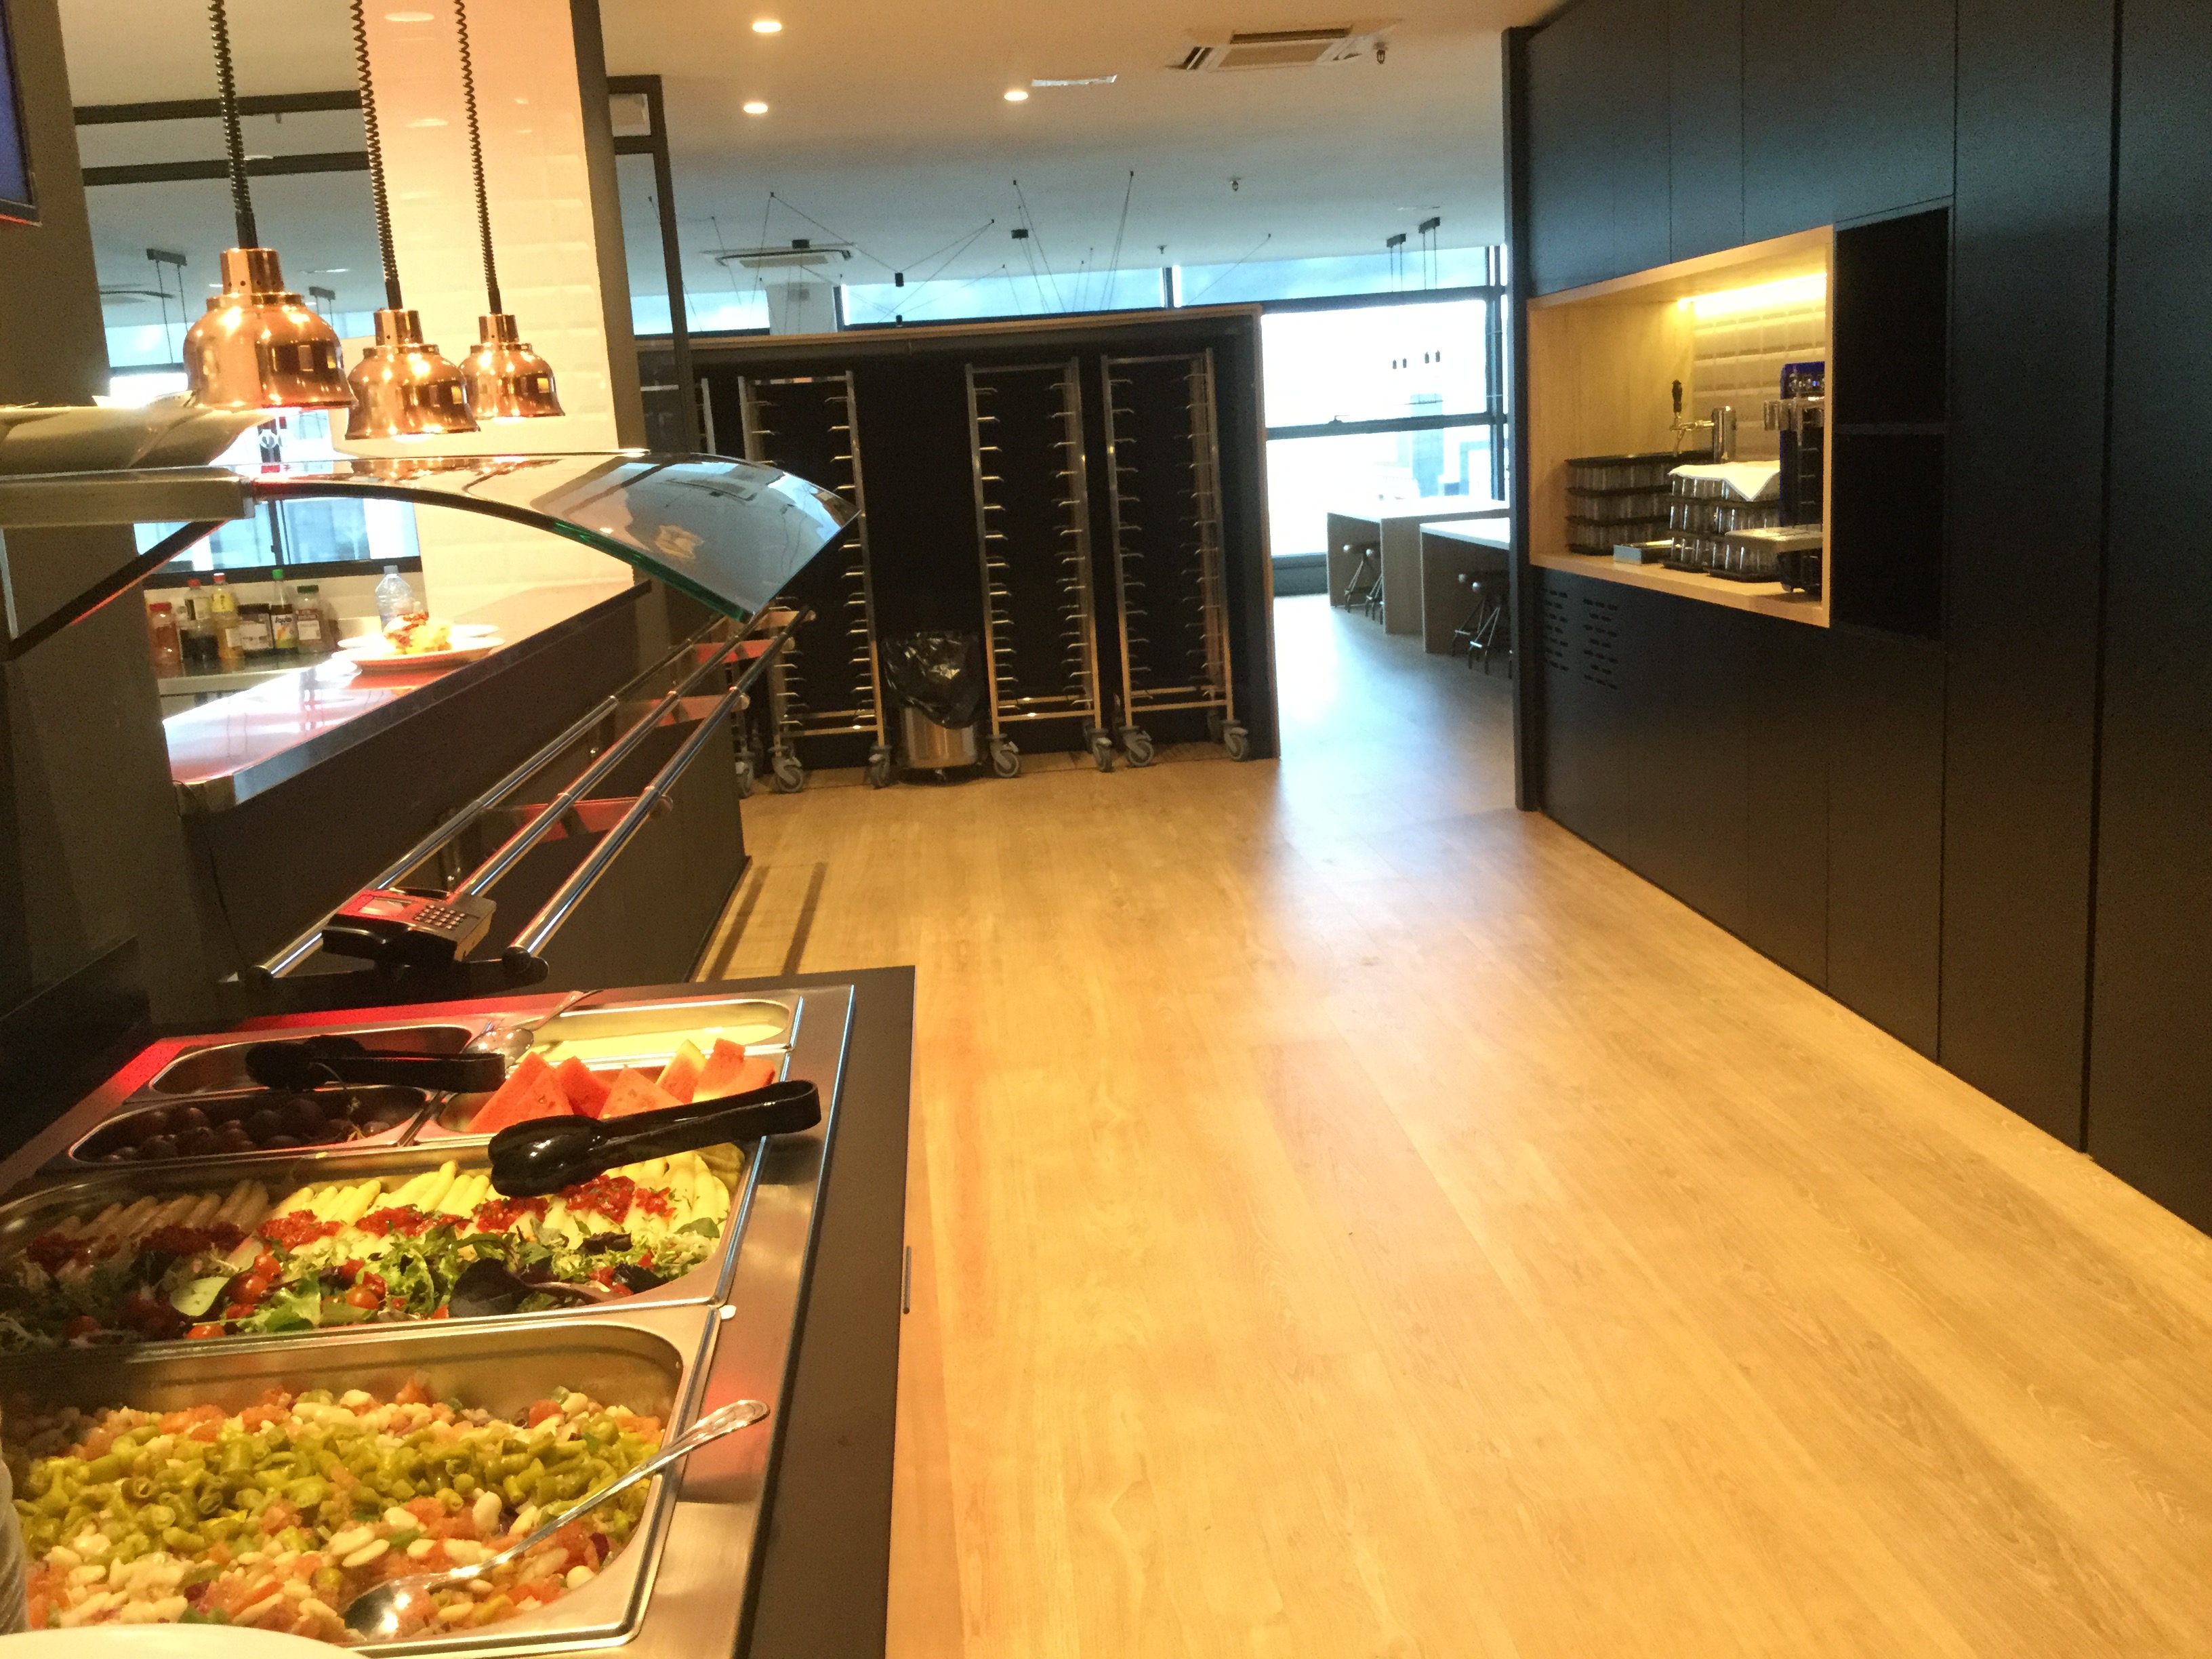 We open kitchen and buffet restaurant at the Palma headquarters